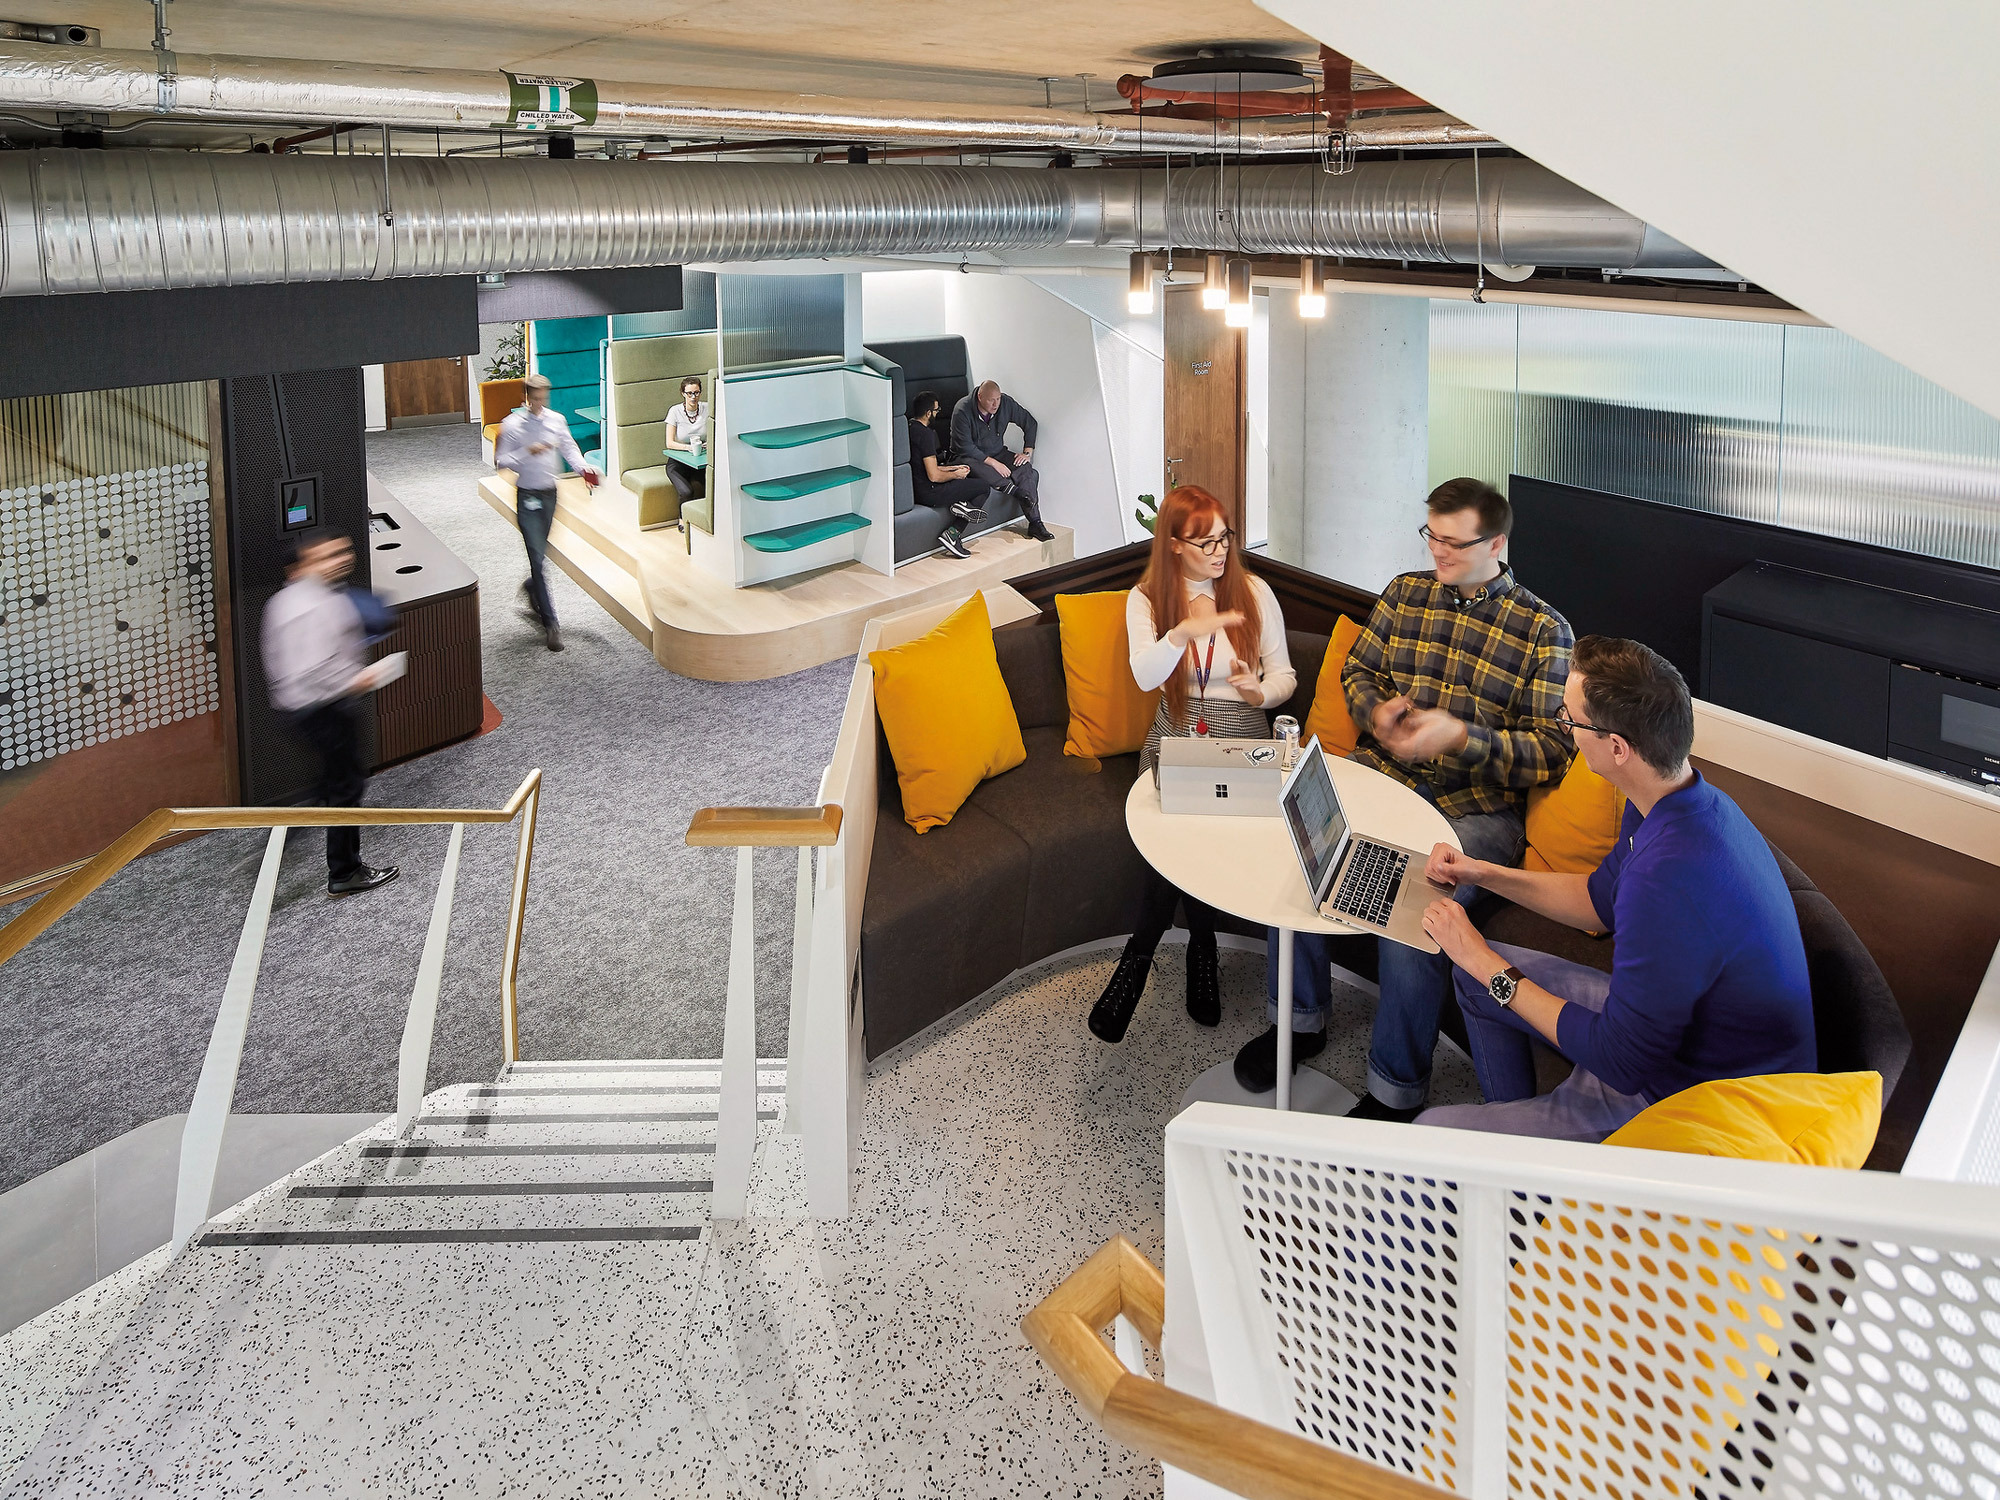 Modern office space with industrial aesthetic, featuring exposed ductwork and a speckled terrazzo floor. A central wooden table with yellow accents provides a collaborative work area, while a slide in the background adds playful functionality. Mesh room dividers offer privacy without visual obstruction.